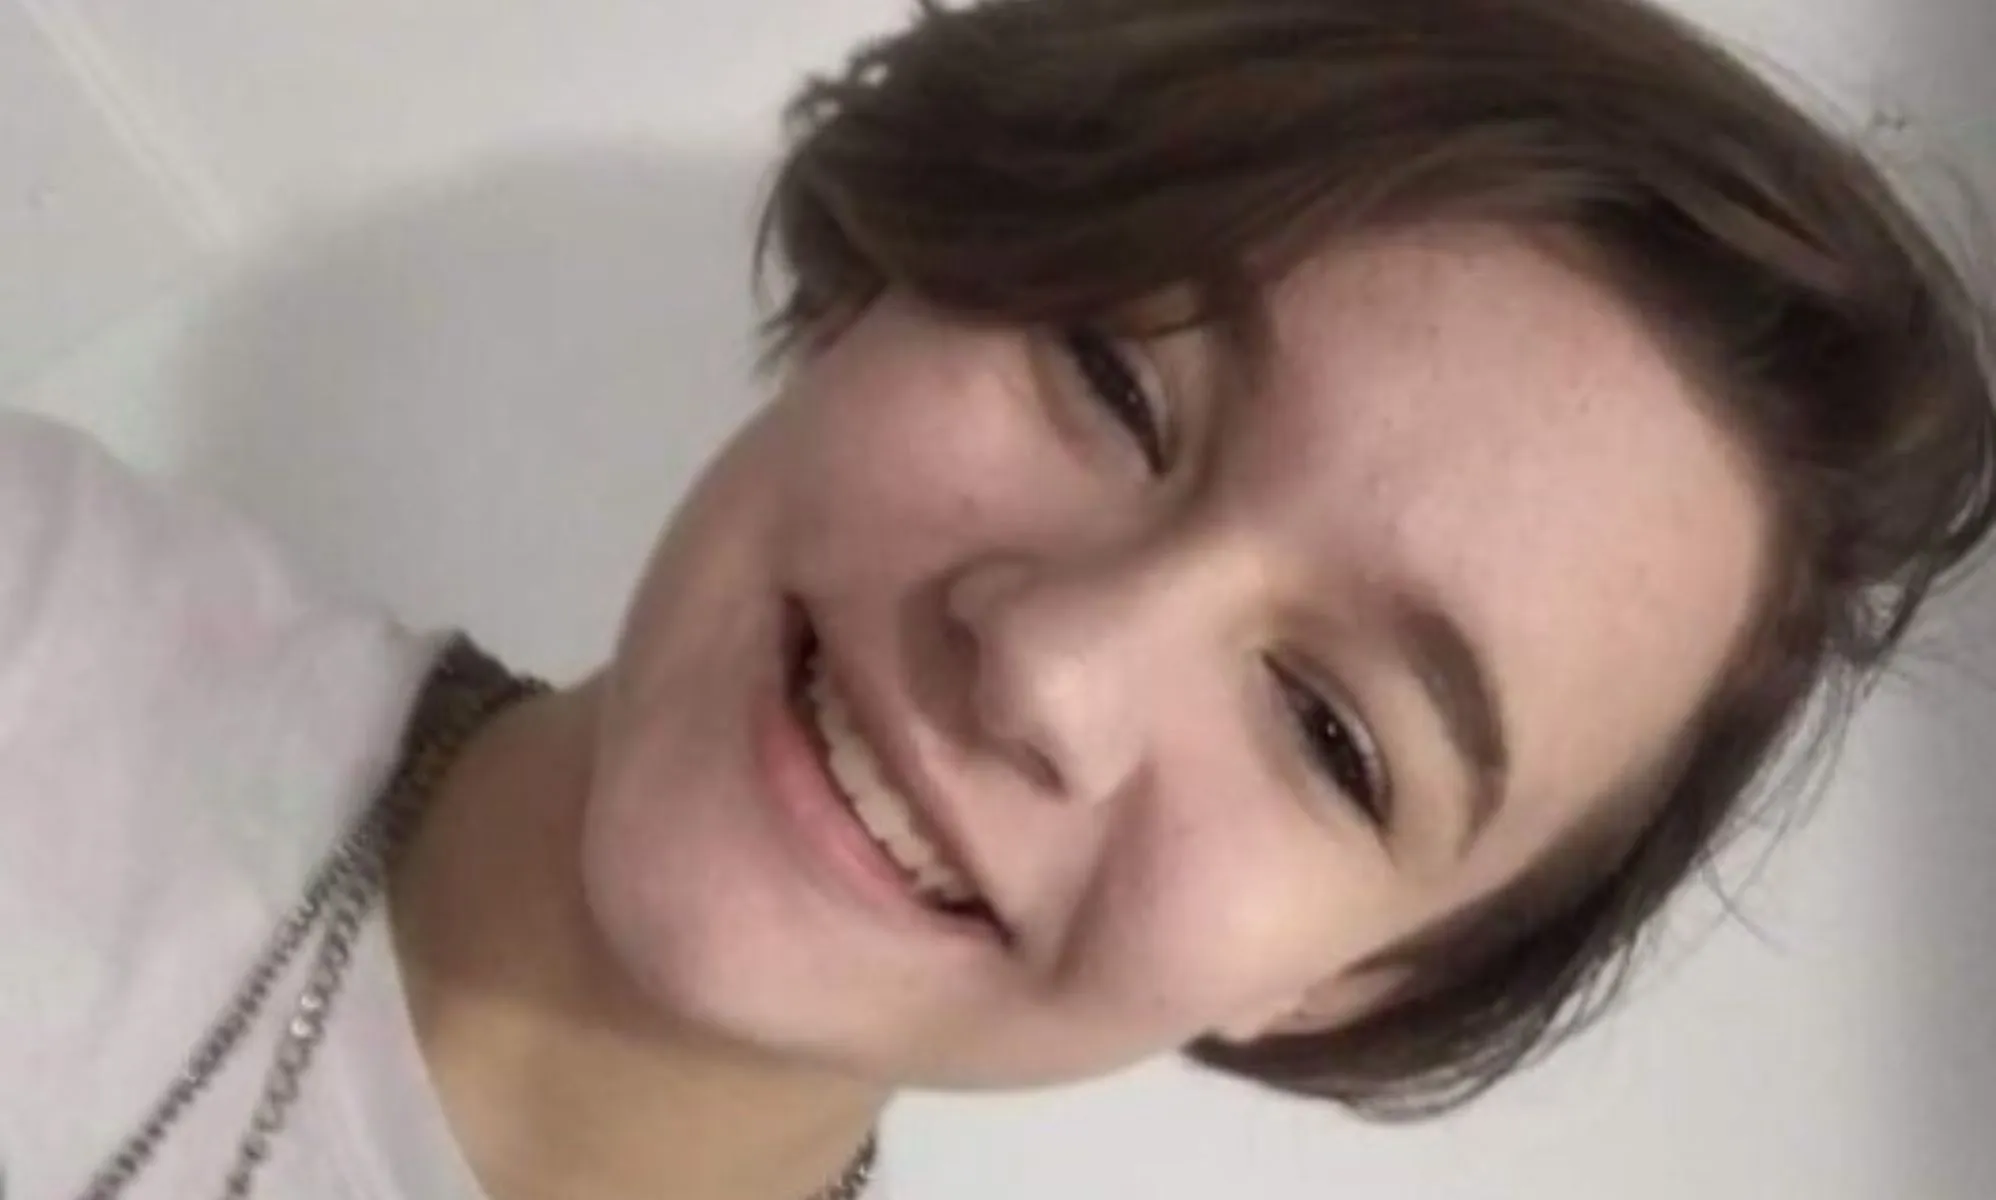 Man arrested after non-binary 17-year-old River Nevaeh Goddard found dead